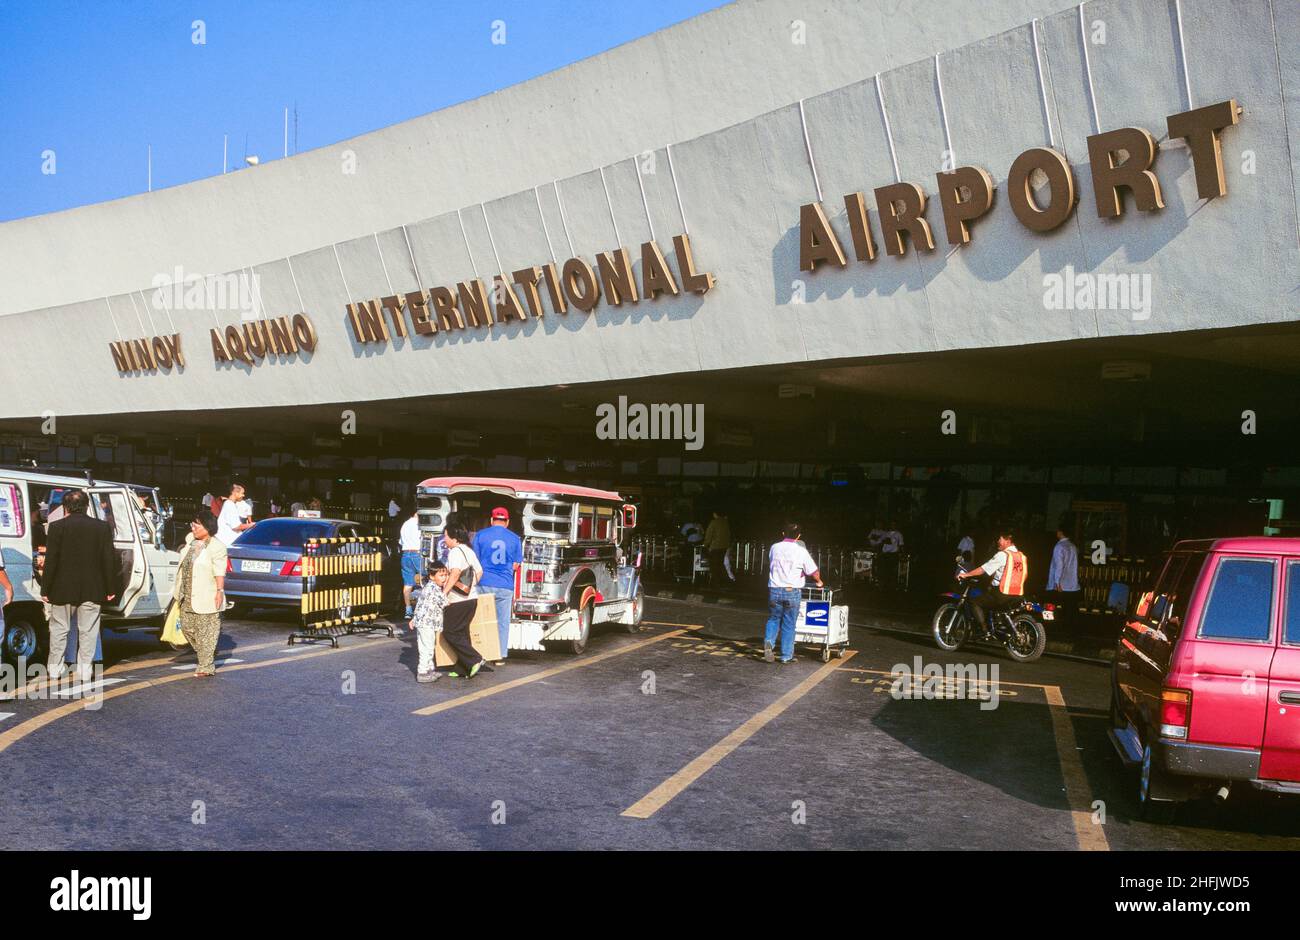 Ninoy Aquino International Airport (NAIA), formerly known and still commonly referred to as Manila International Airport, is the airport serving Manila and its surrounding area. The airport is named after Senator Benigno 'Ninoy' Aquino Jr., who was assassinated at the airport in 1983. Pictured: the exterior of NAIA Airport. Stock Photo